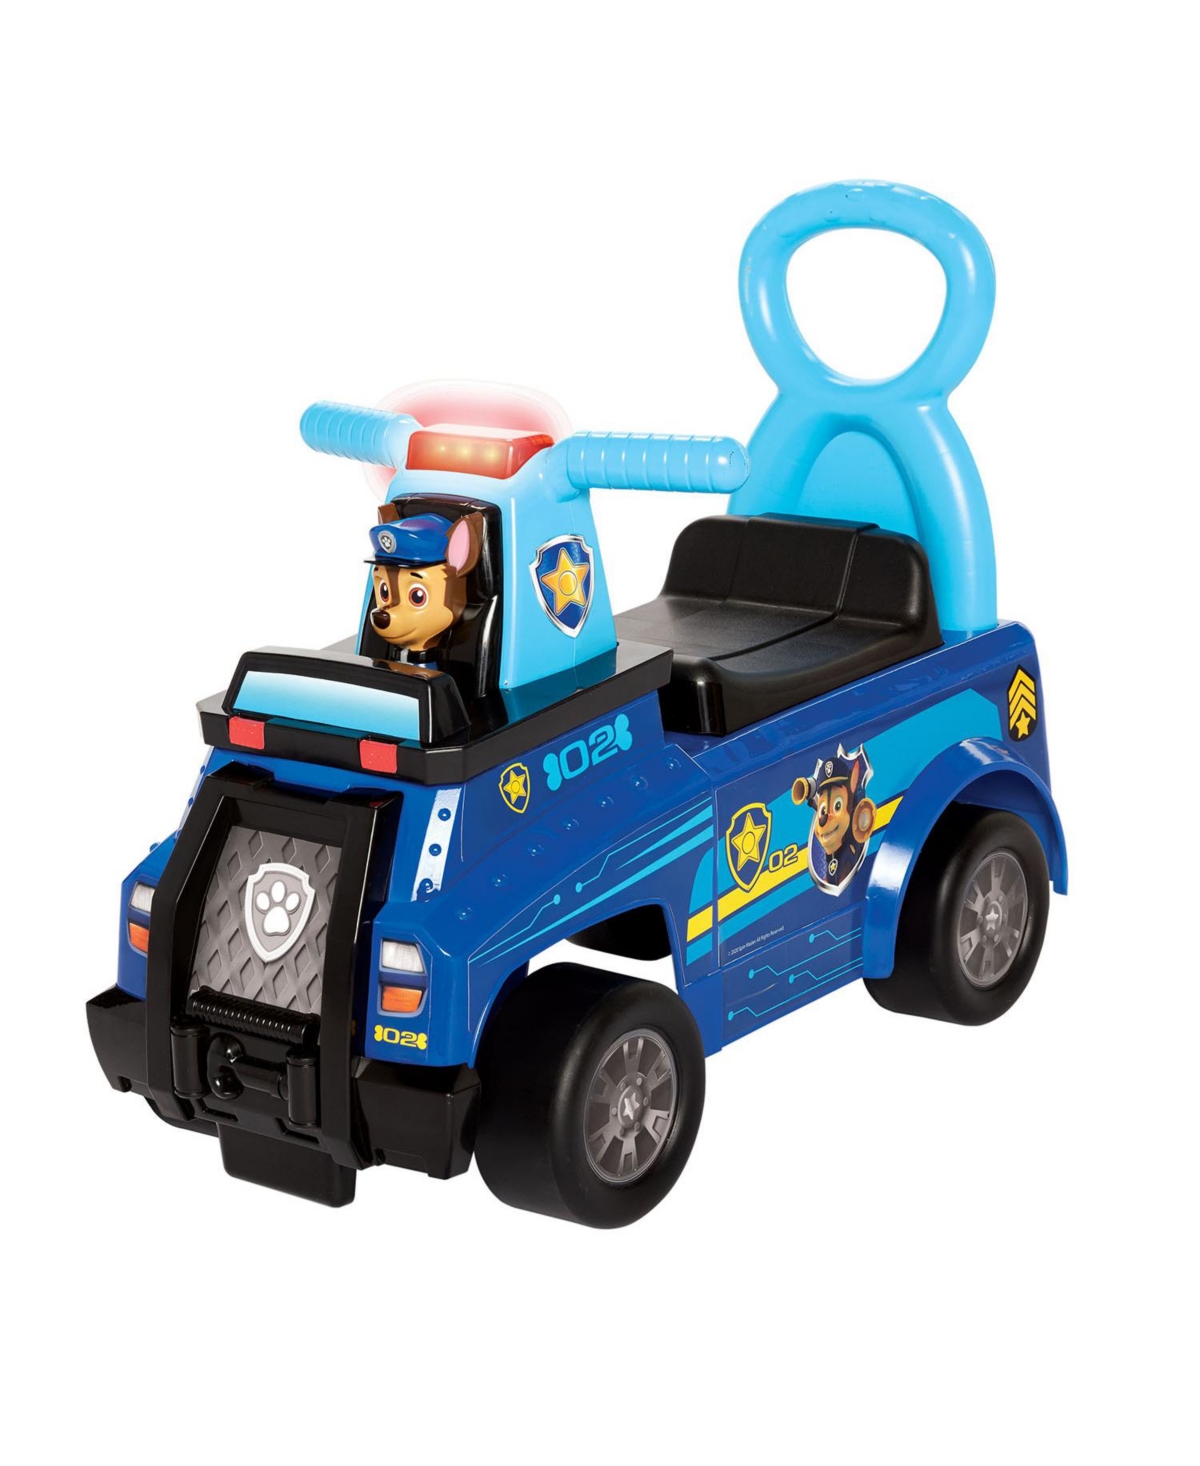 Paw Patrol Movie Chase Cruiser Ride-on In Multicolor